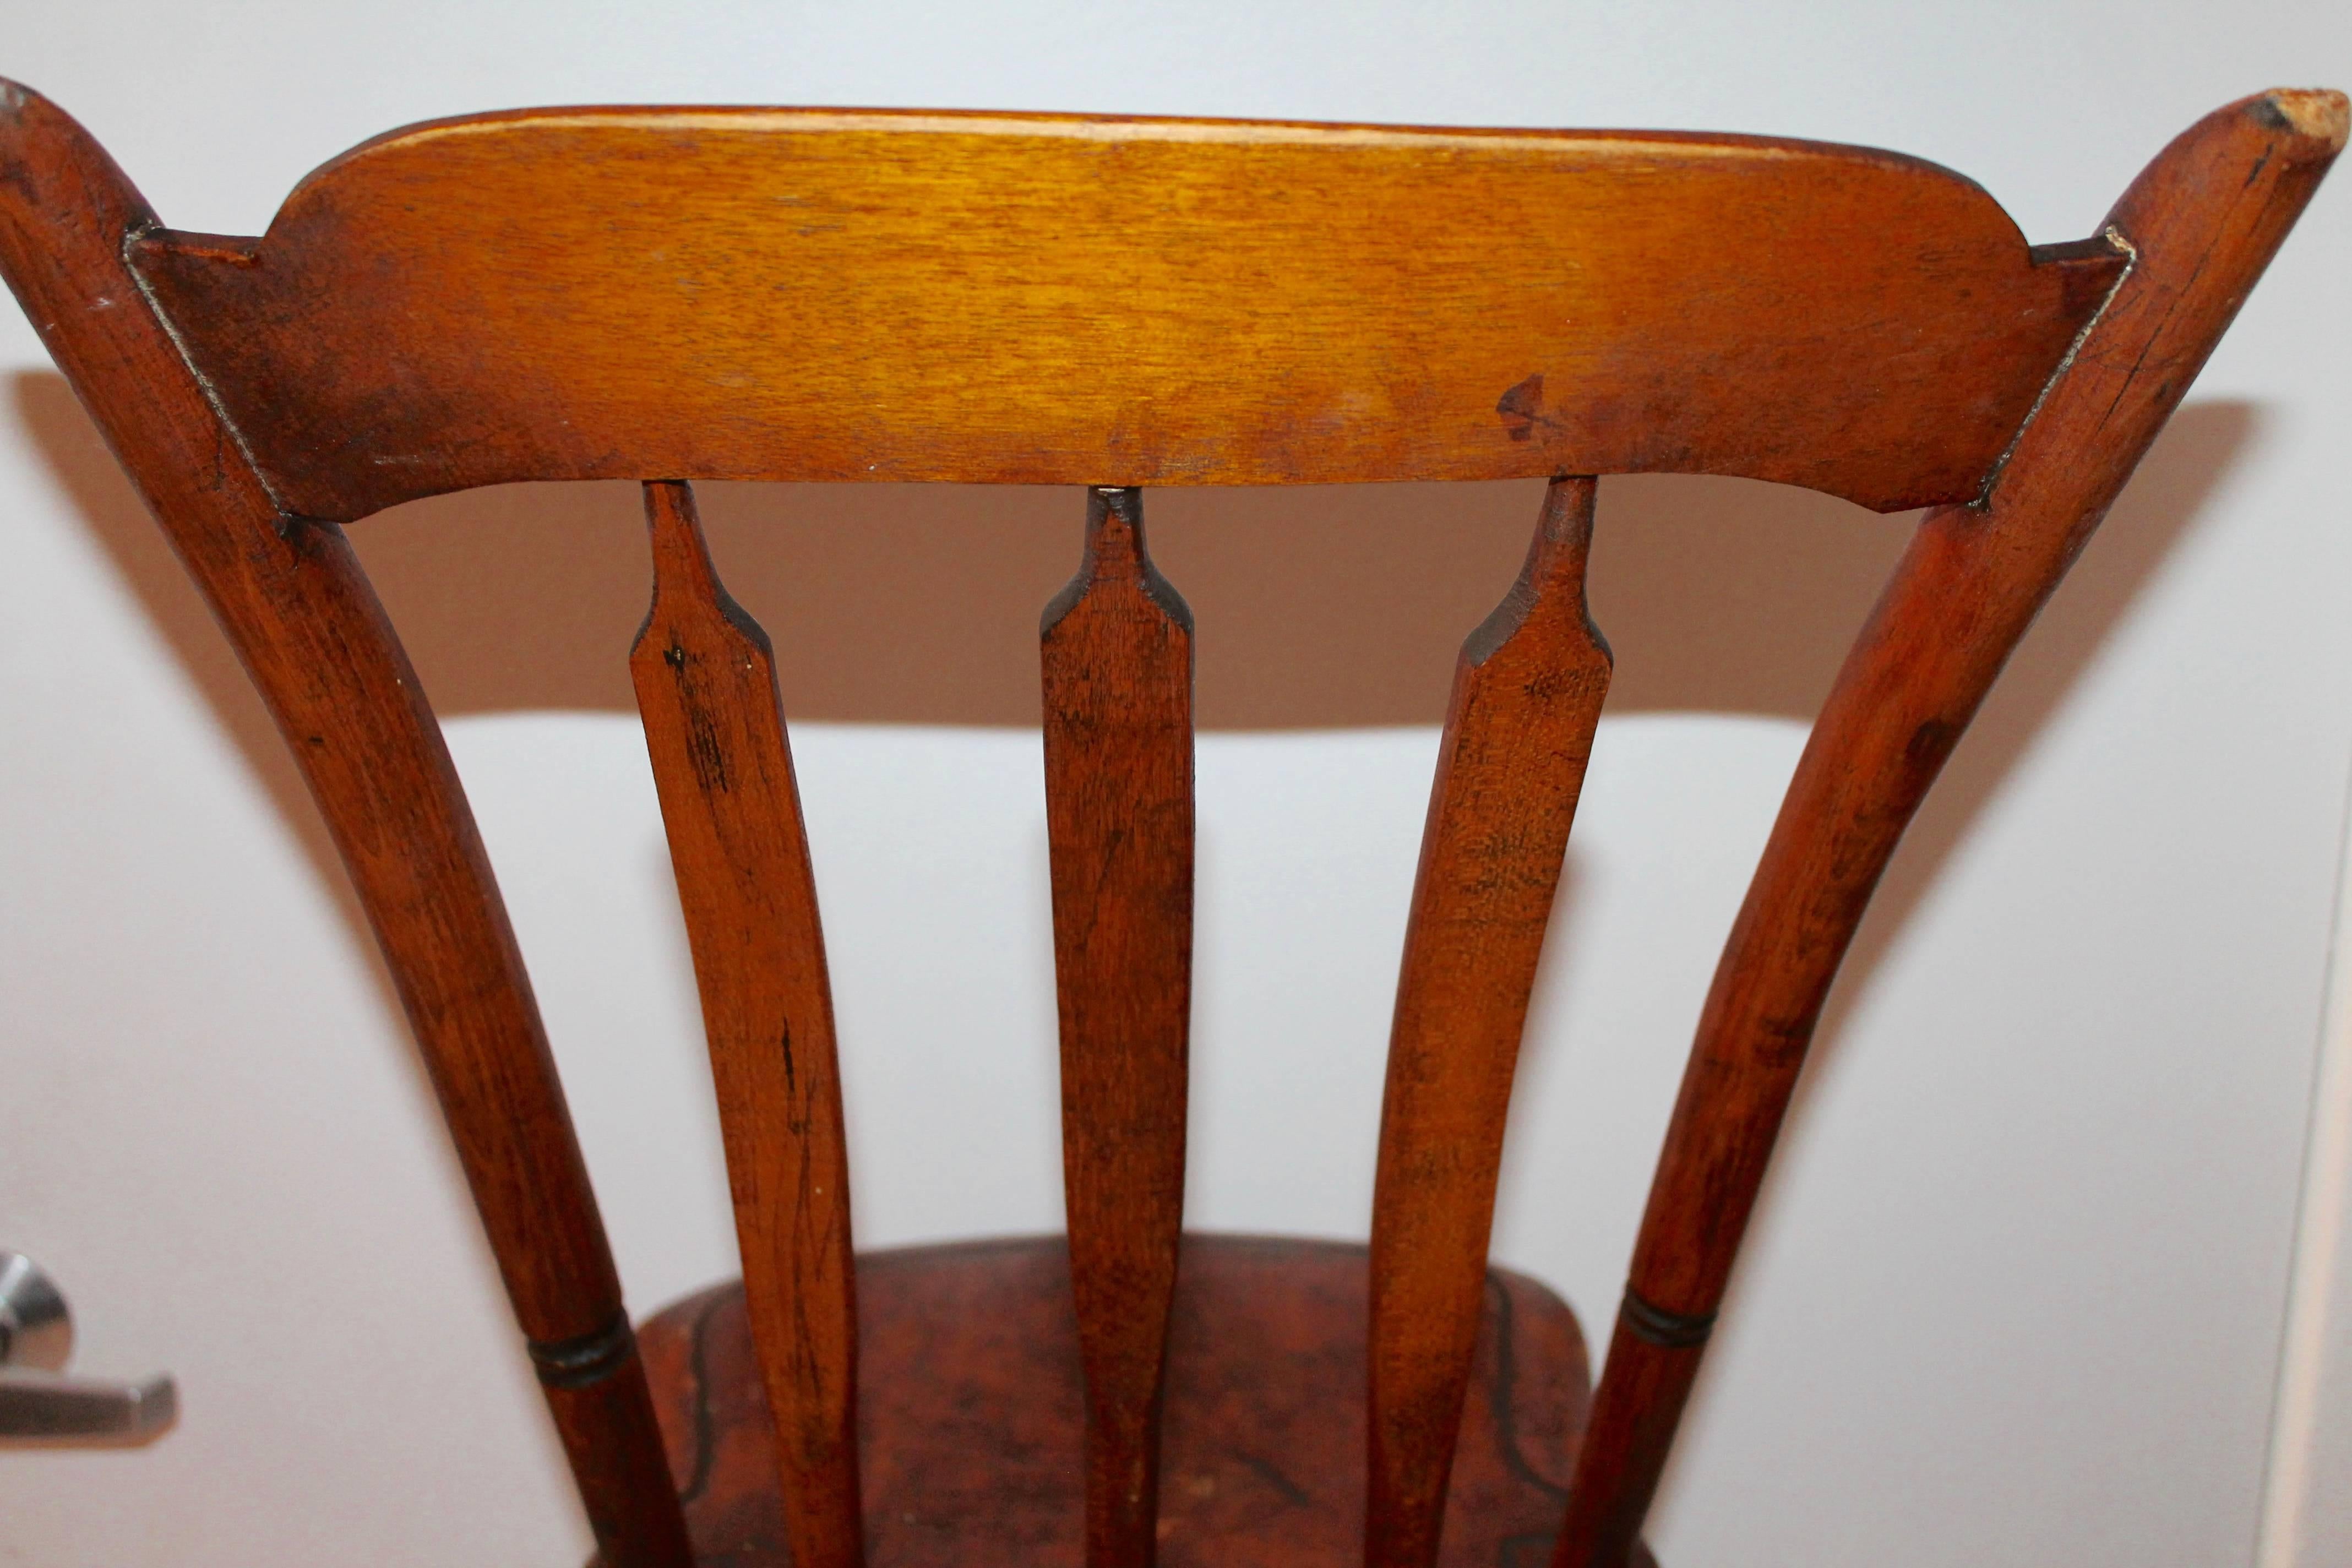 Country Amazing Early 19th Century Child's Thumbtack/Arrowback Windsor Chair For Sale